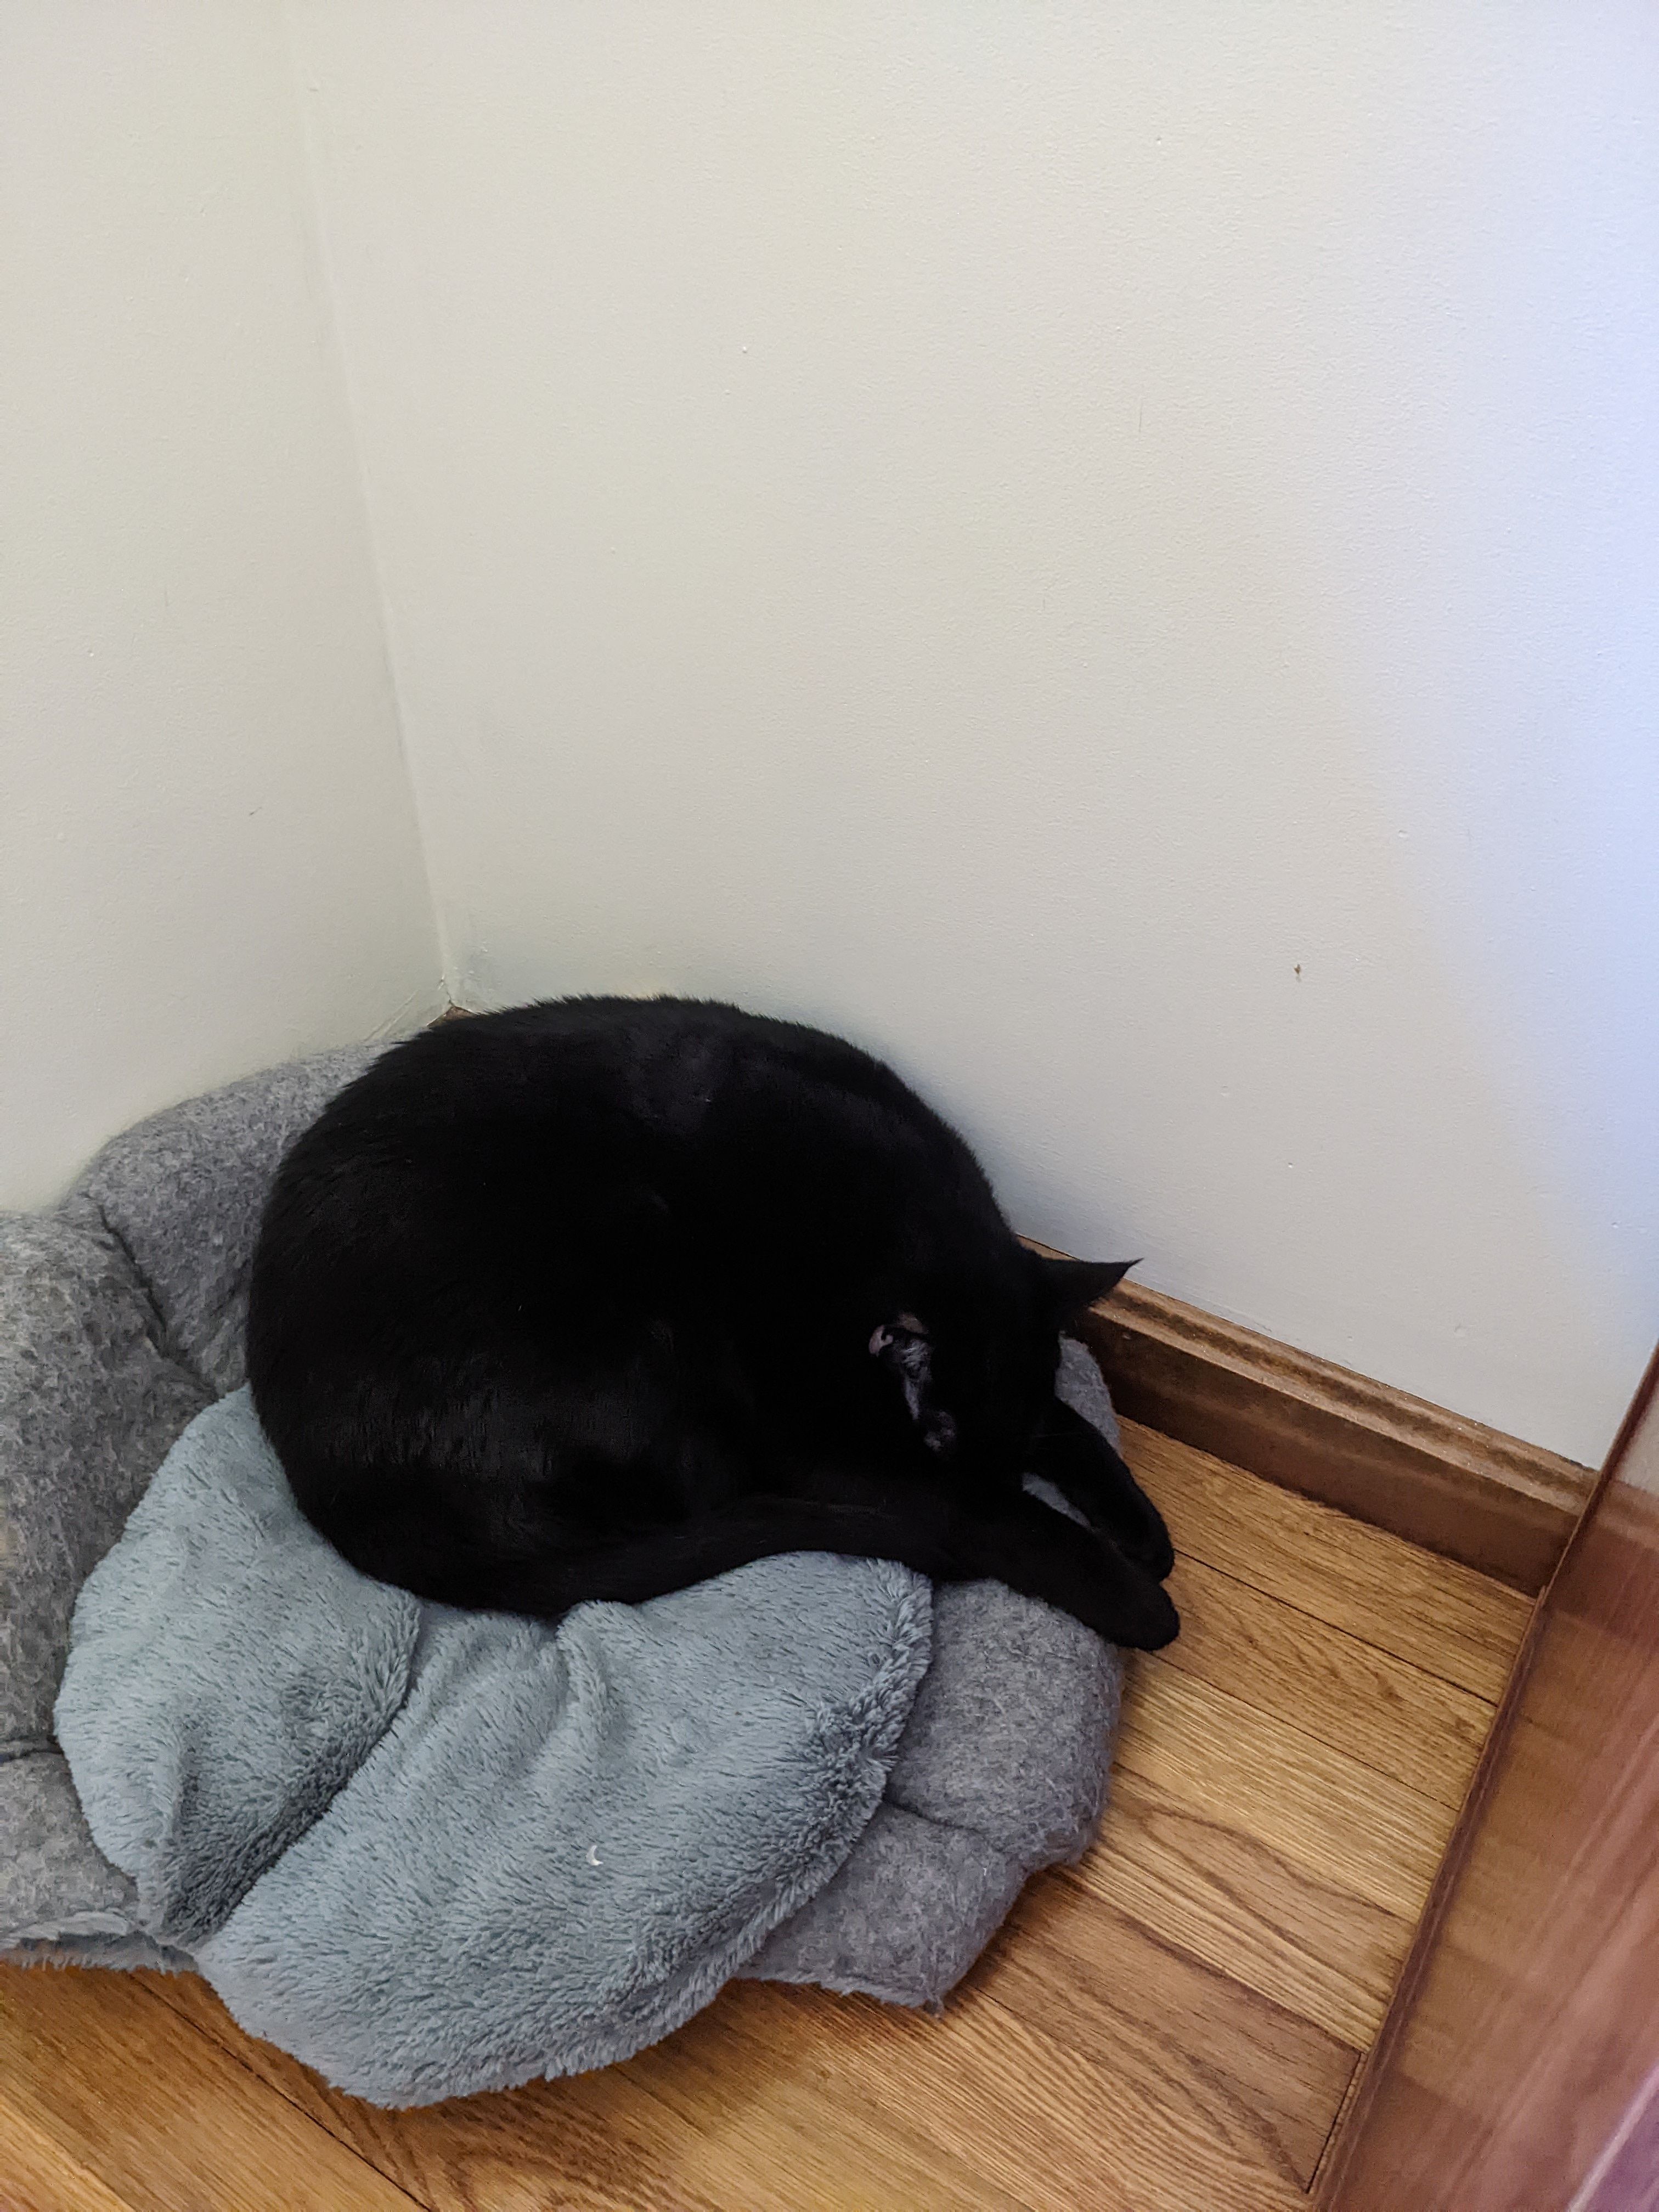 A picture of a black cat curled up on a bed taken on a Pixel 4a 5G